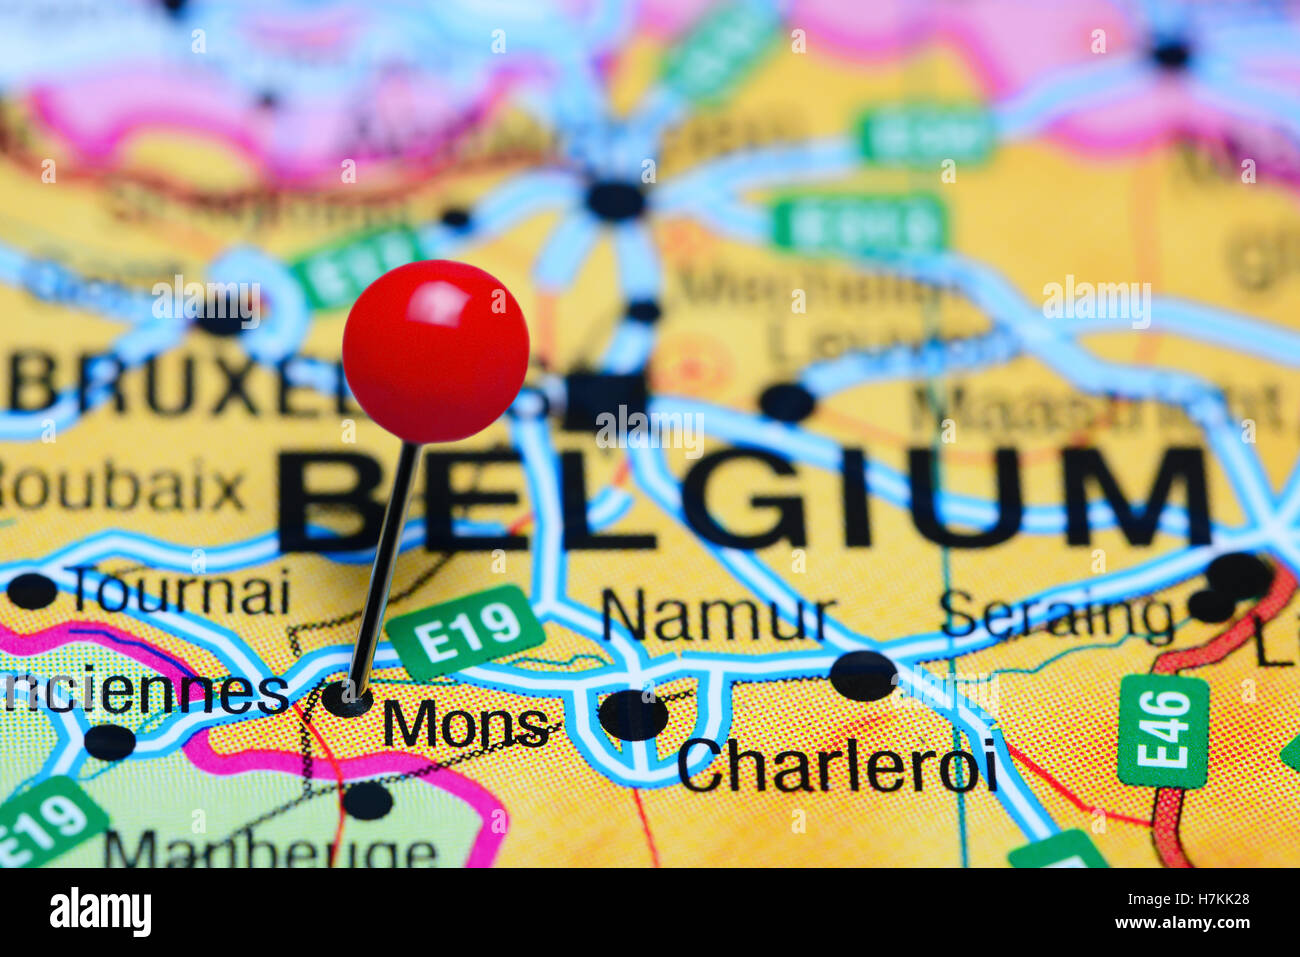 Mons pinned on a map of Belgium Stock Photo